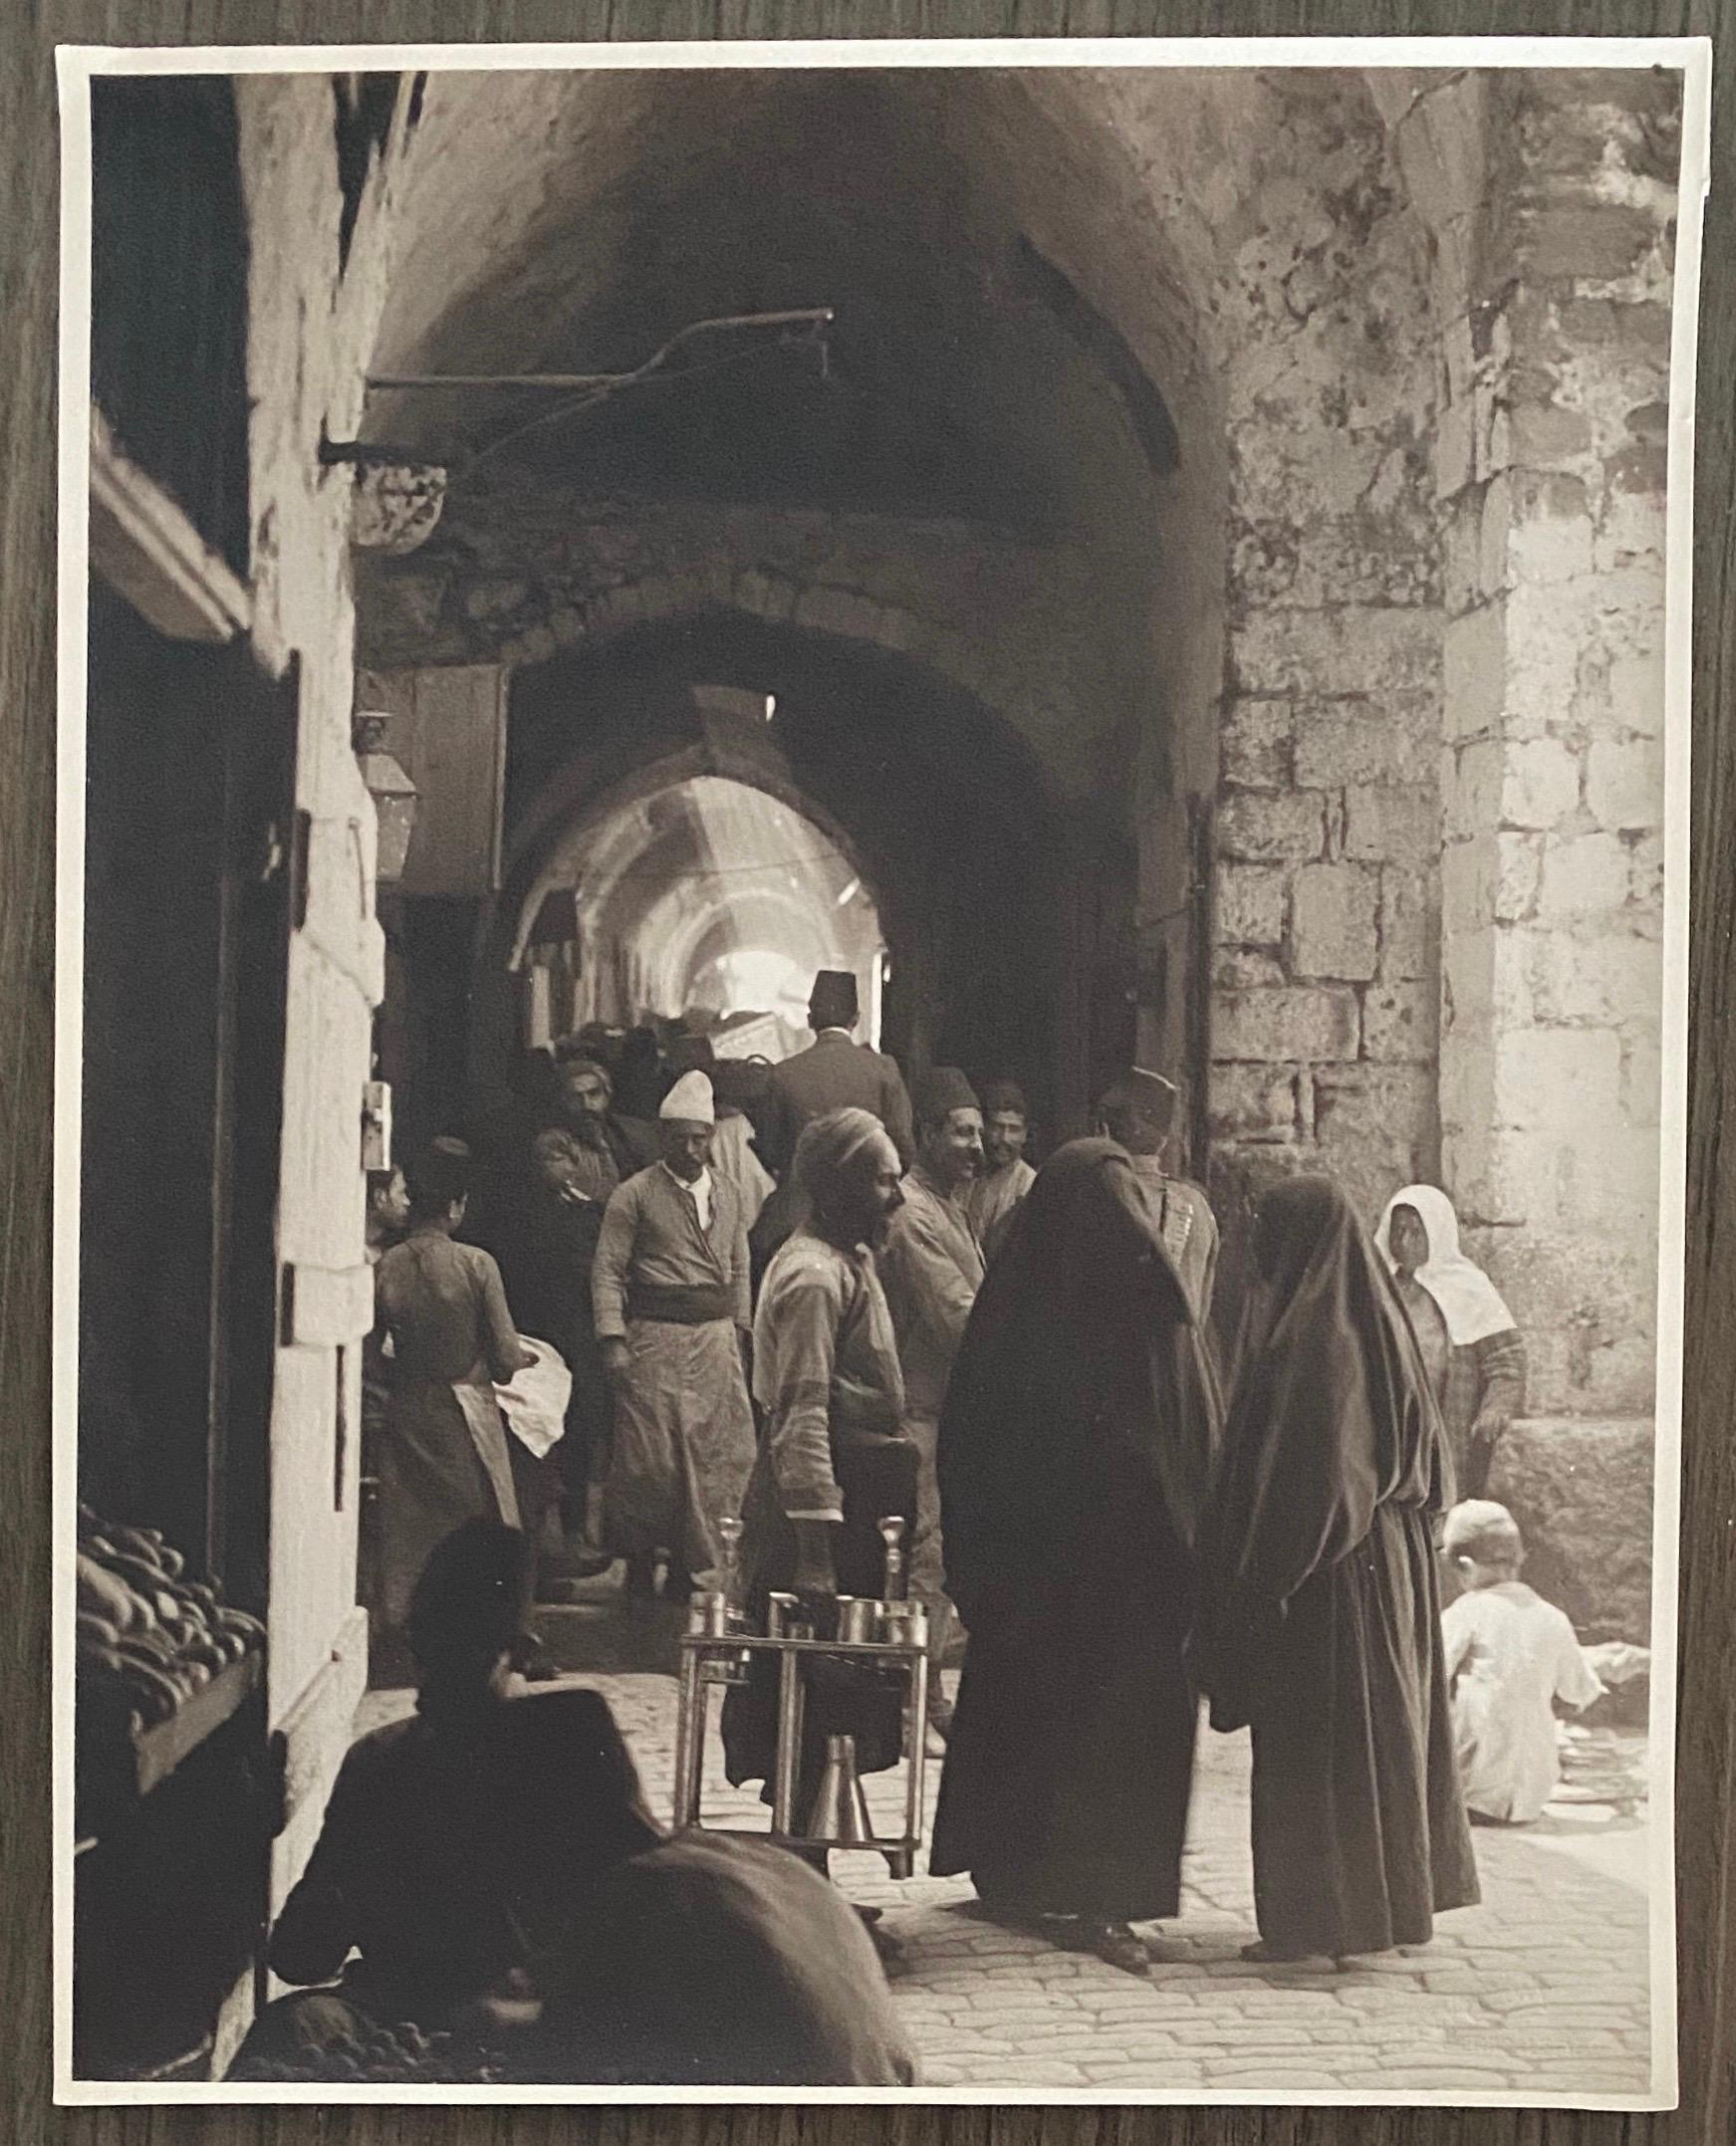 The Original American Colony was a colony established in Jerusalem in 1881 by members of a utopian society led by Anna and Horatio Spafford. Now a hotel in East Jerusalem, it is still known by that name today.

After suffering a series tragic losses